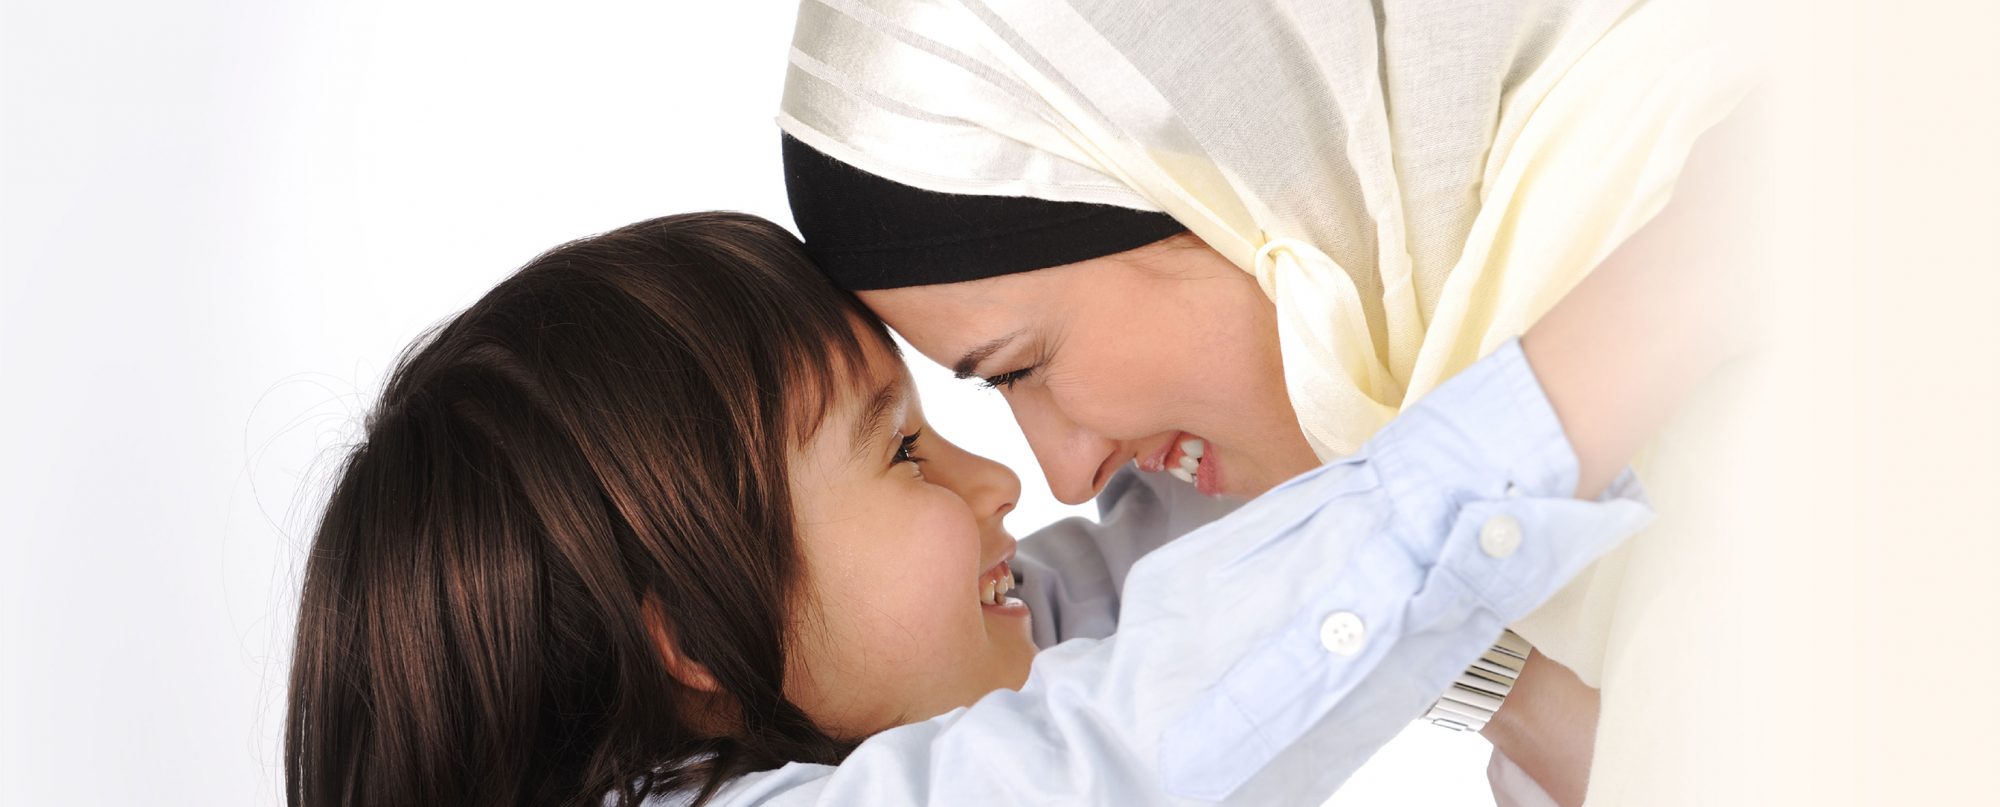 Muslim Fostering: We need to care for the future generation